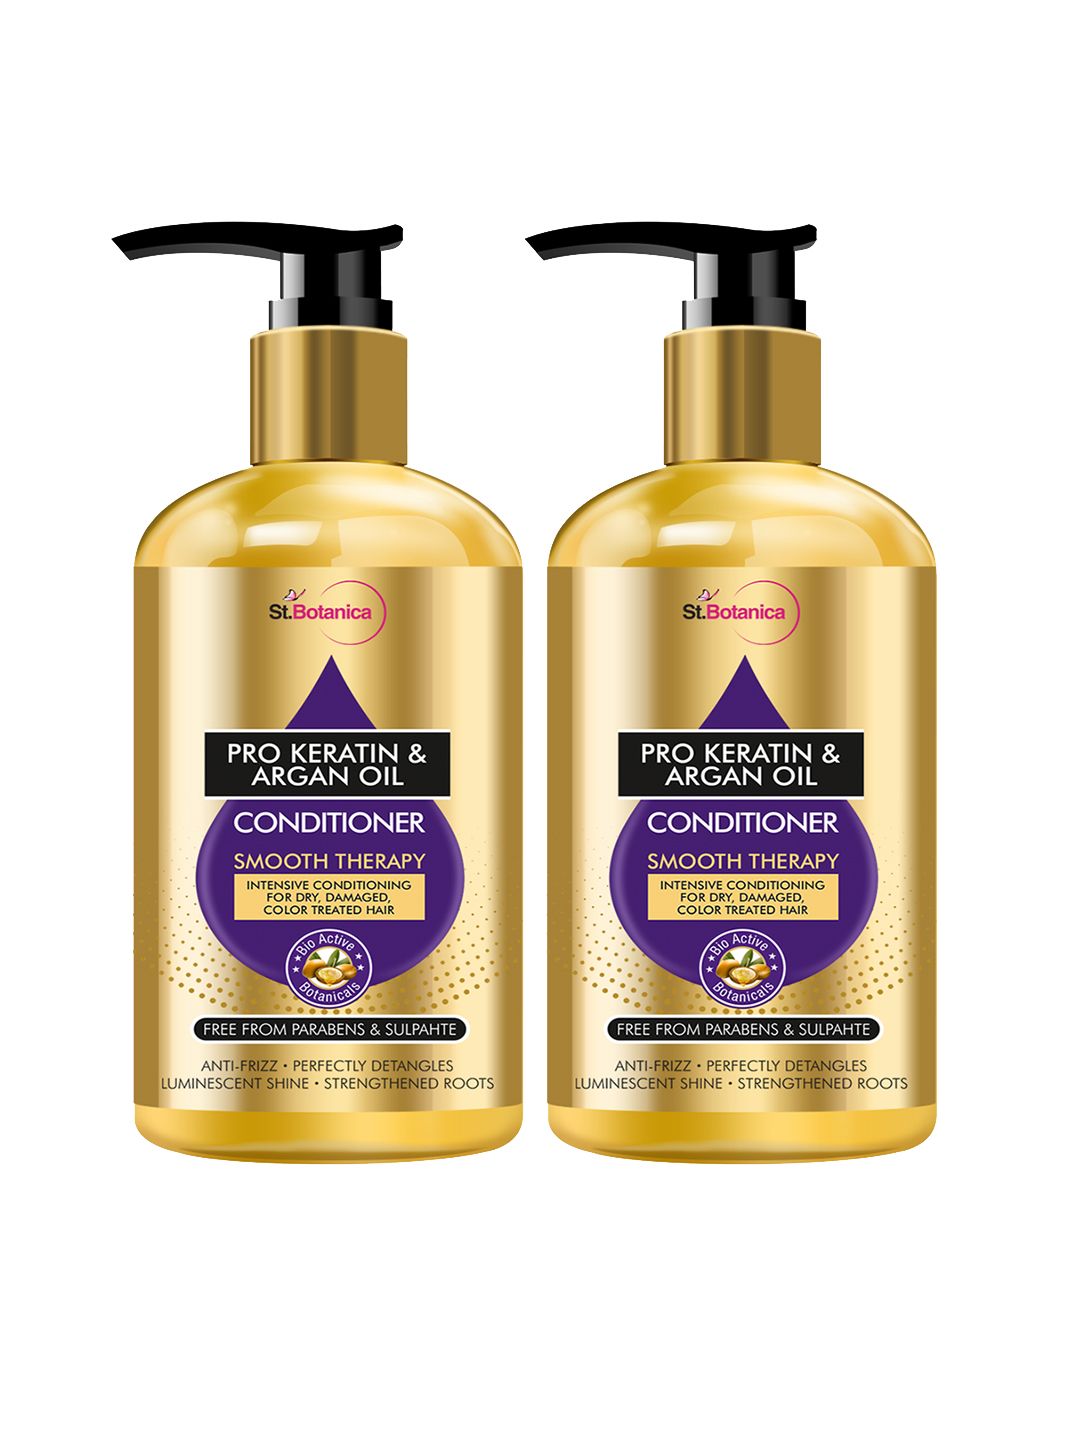 St.Botanica Set Of 2 Pro Keratin & Argan Oil Smooth Therapy Conditioner 300ml Price in India